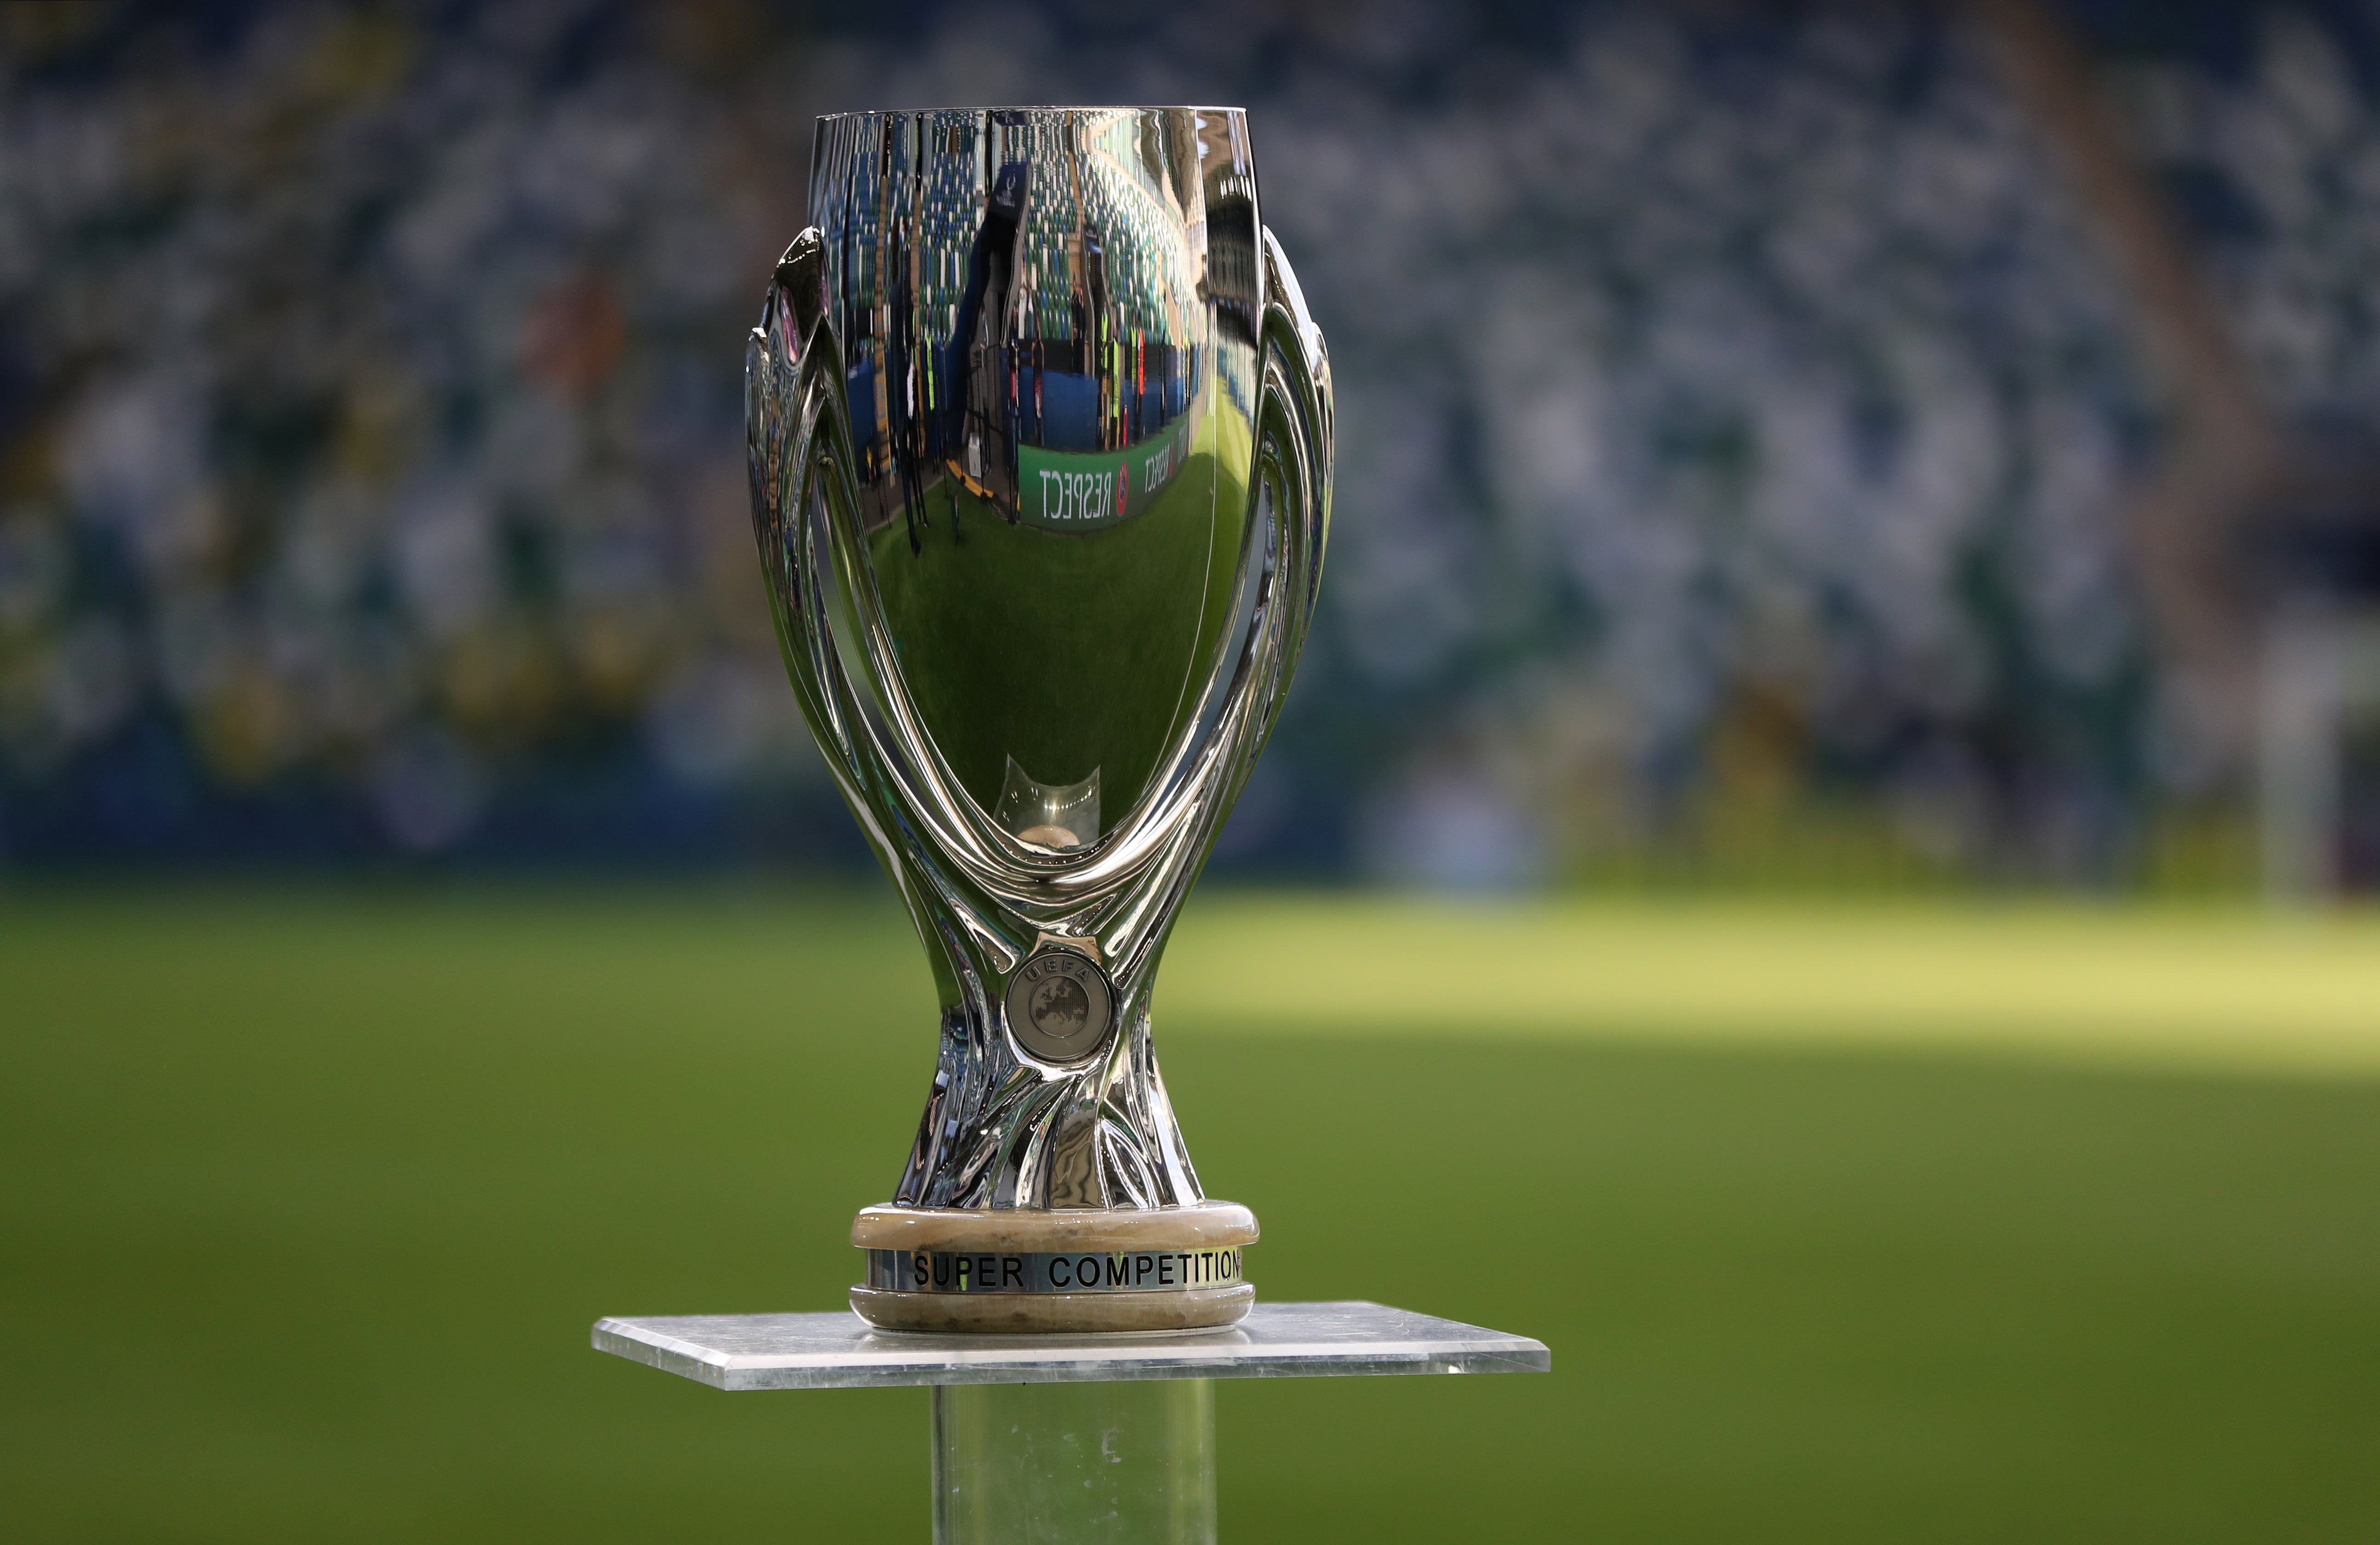 The Uefa Super Cup is played annually